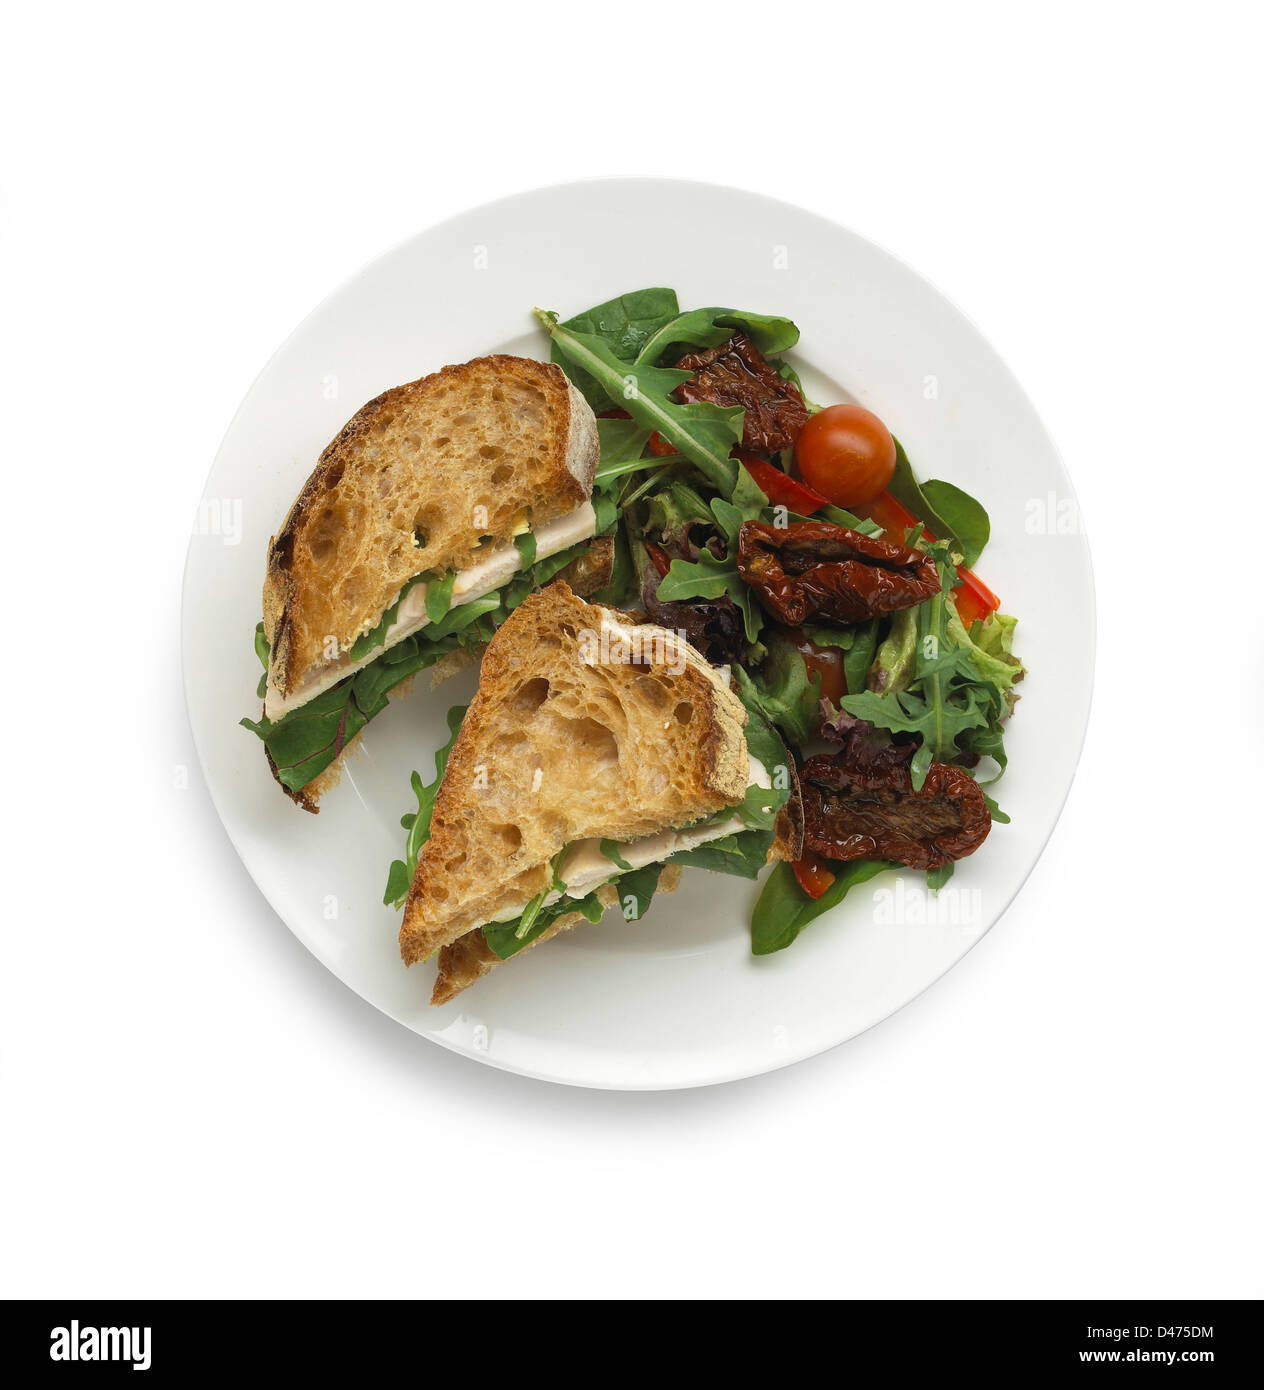 Plate with two sandwiches and mixed salad cut out white background Stock Photo